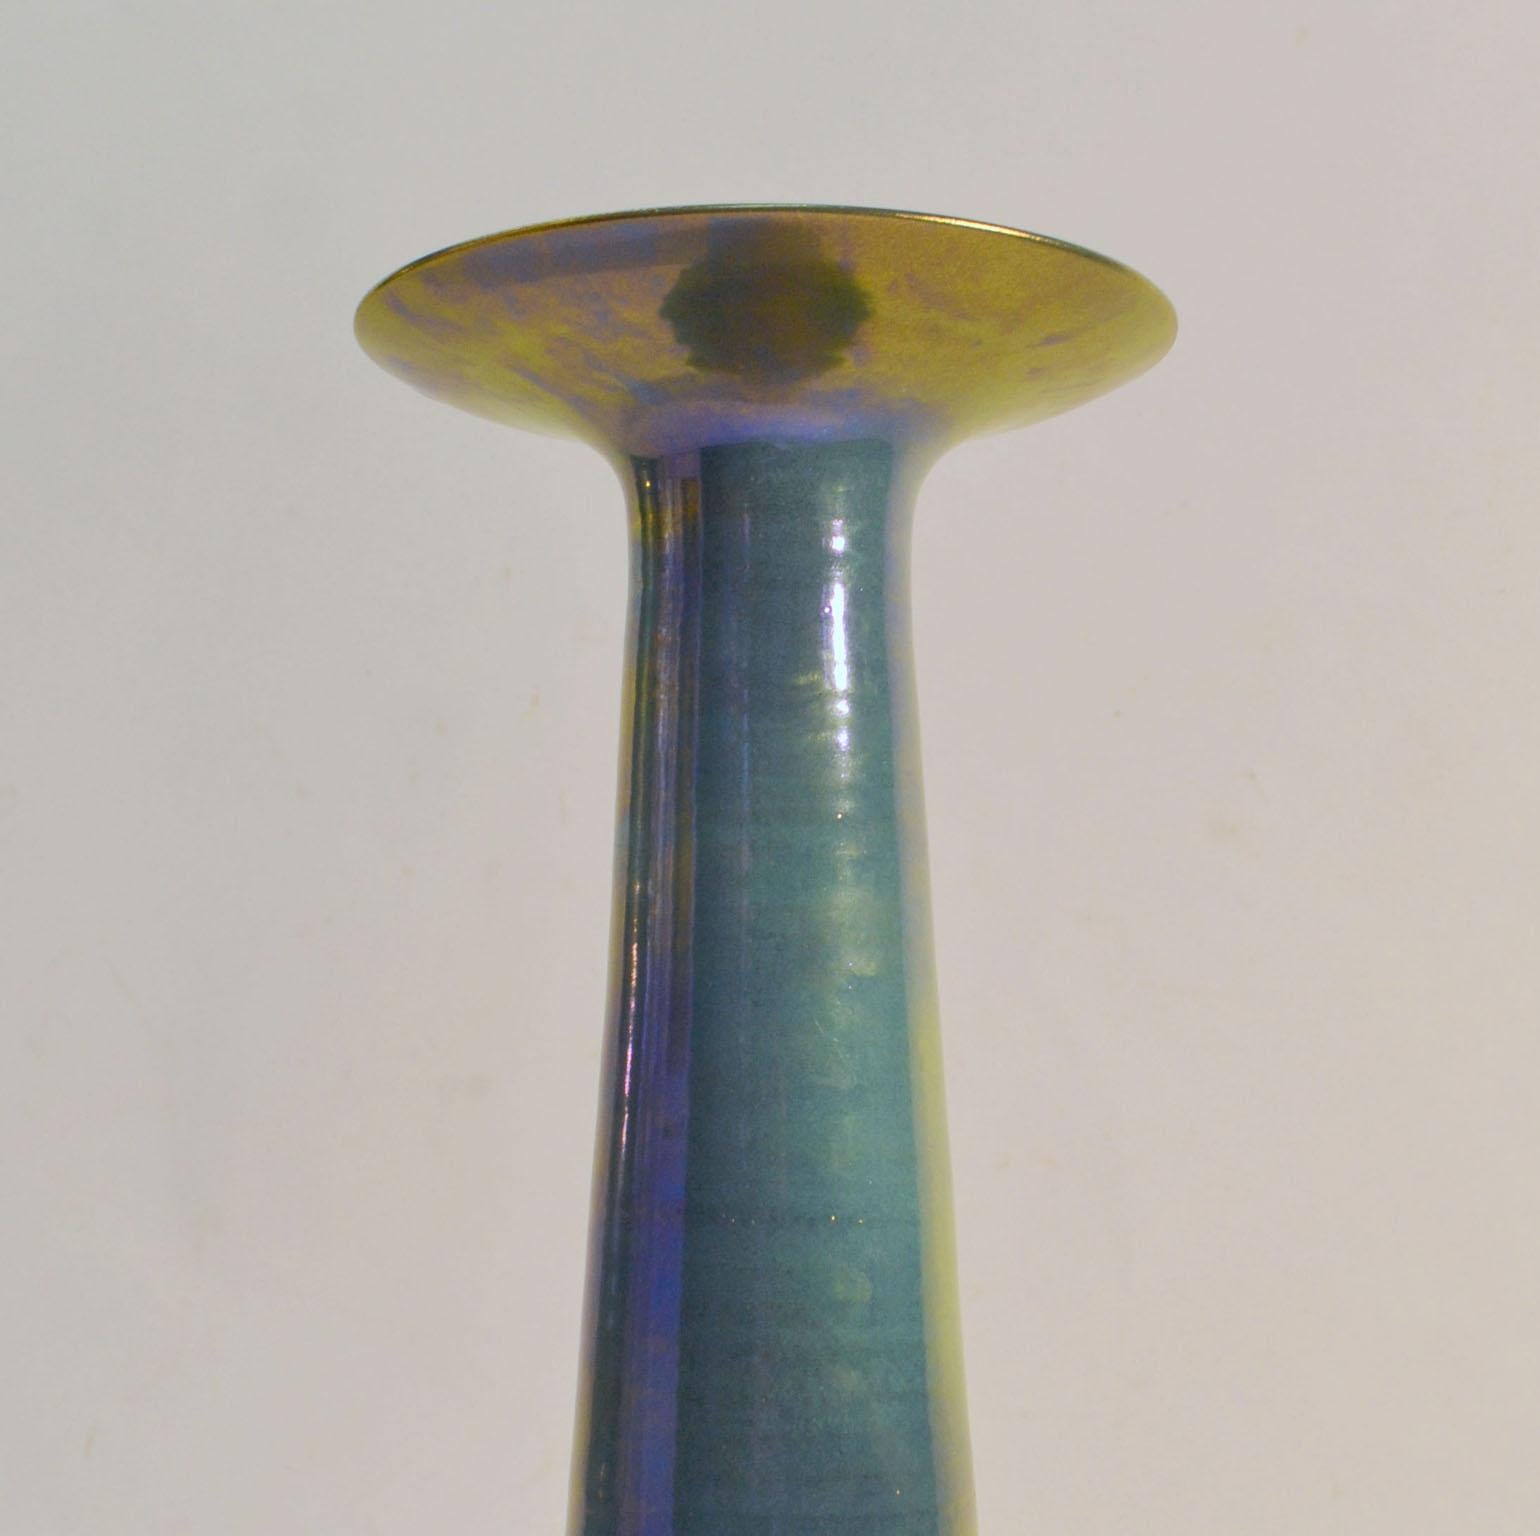 Elongated cone shaped hand-turned vase with exaggerated lip has an iridescent glaze in the dominant colour of turquoise flowing to sky-blue, purple and contrasting mustard-yellow. This vase is an exercise of craftsmanship by the potter in the